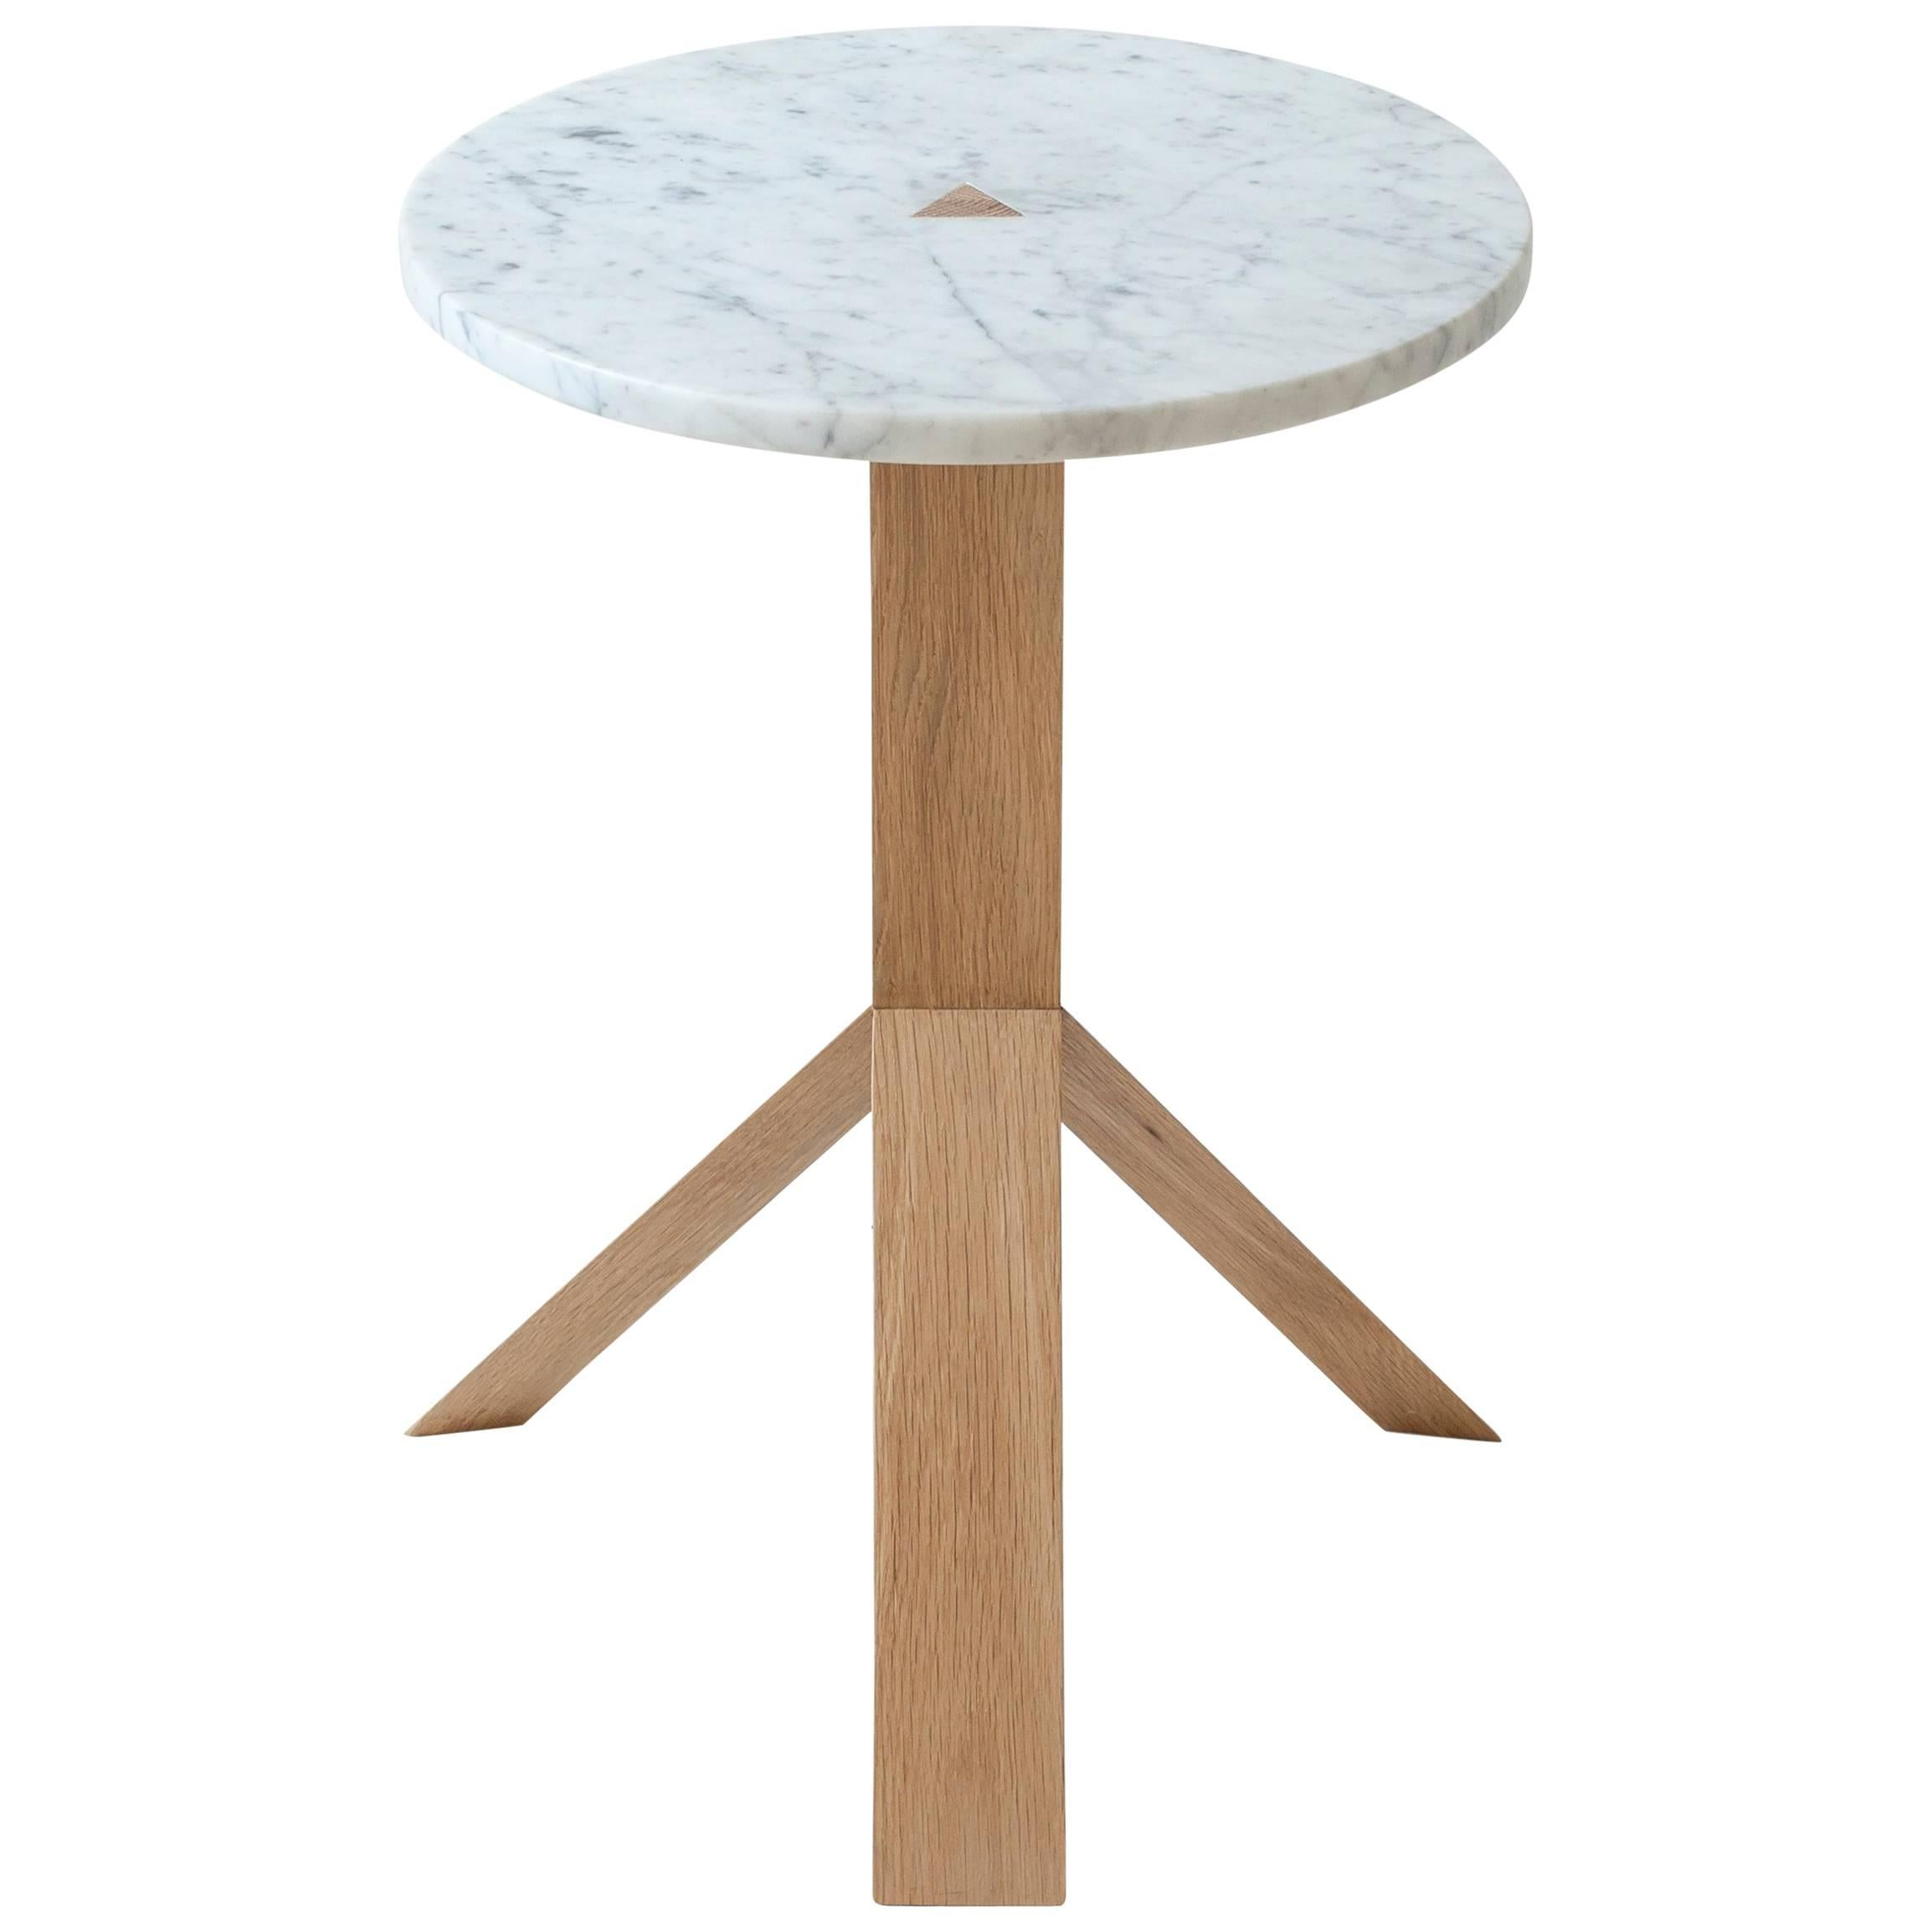 Contemporary Elevate Side Table in White Oak Wood and Stone by Fort Standard